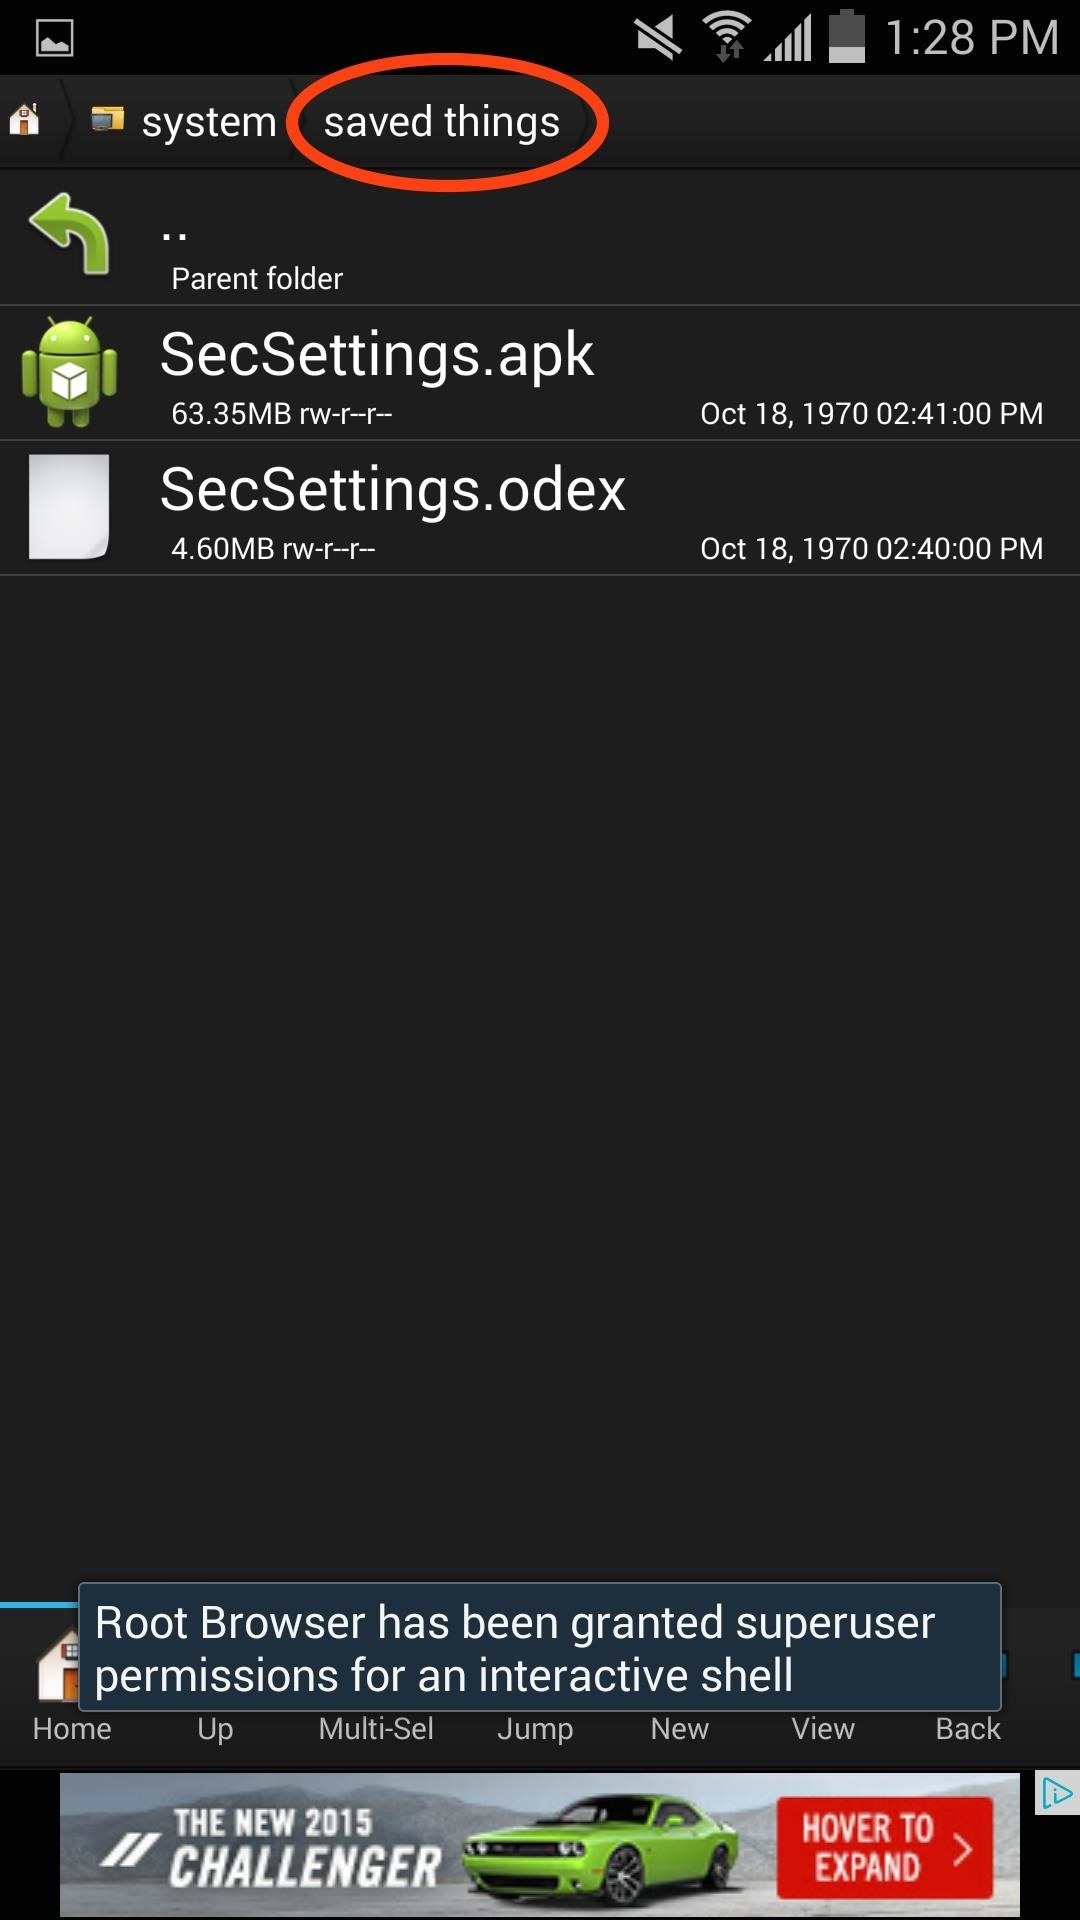 Install the Galaxy S5 Settings Theme on Your Galaxy S4